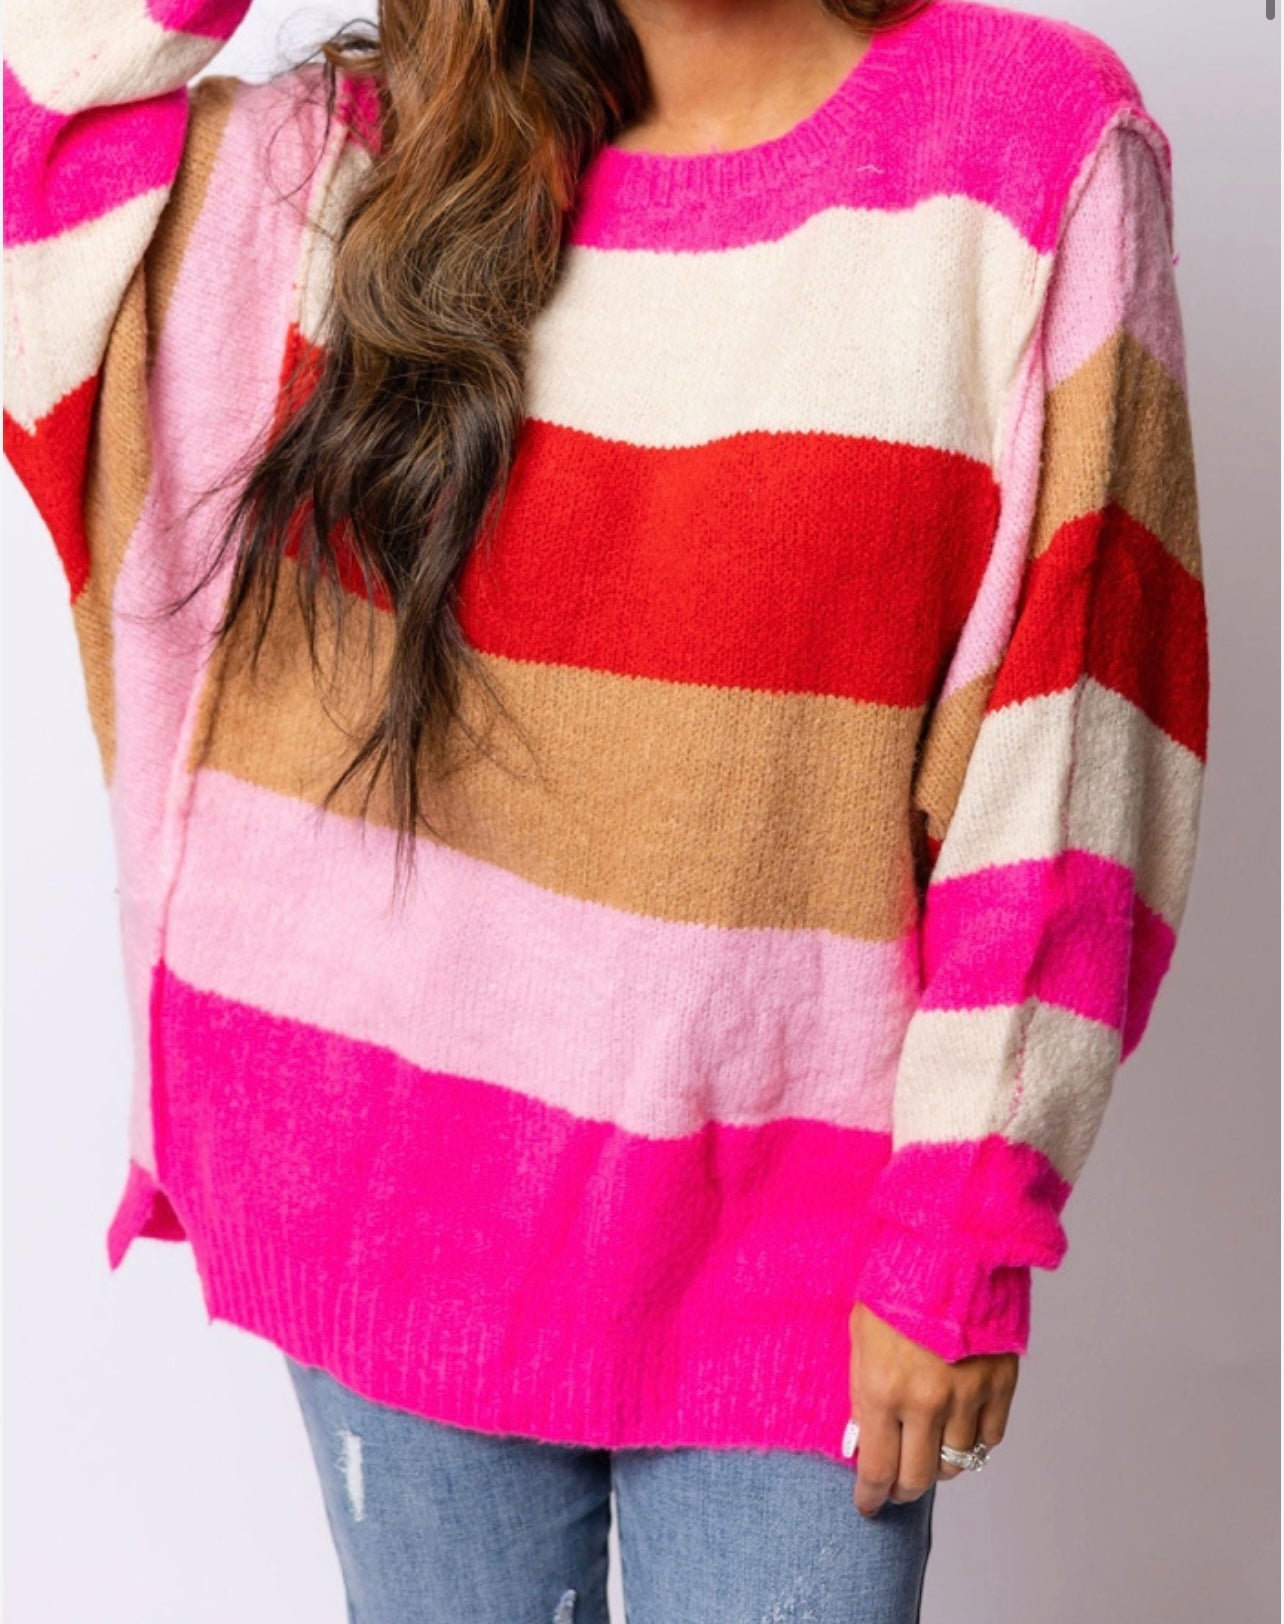 Colorful Stripes Soft Loose Fit Sweater - Regular & Plus